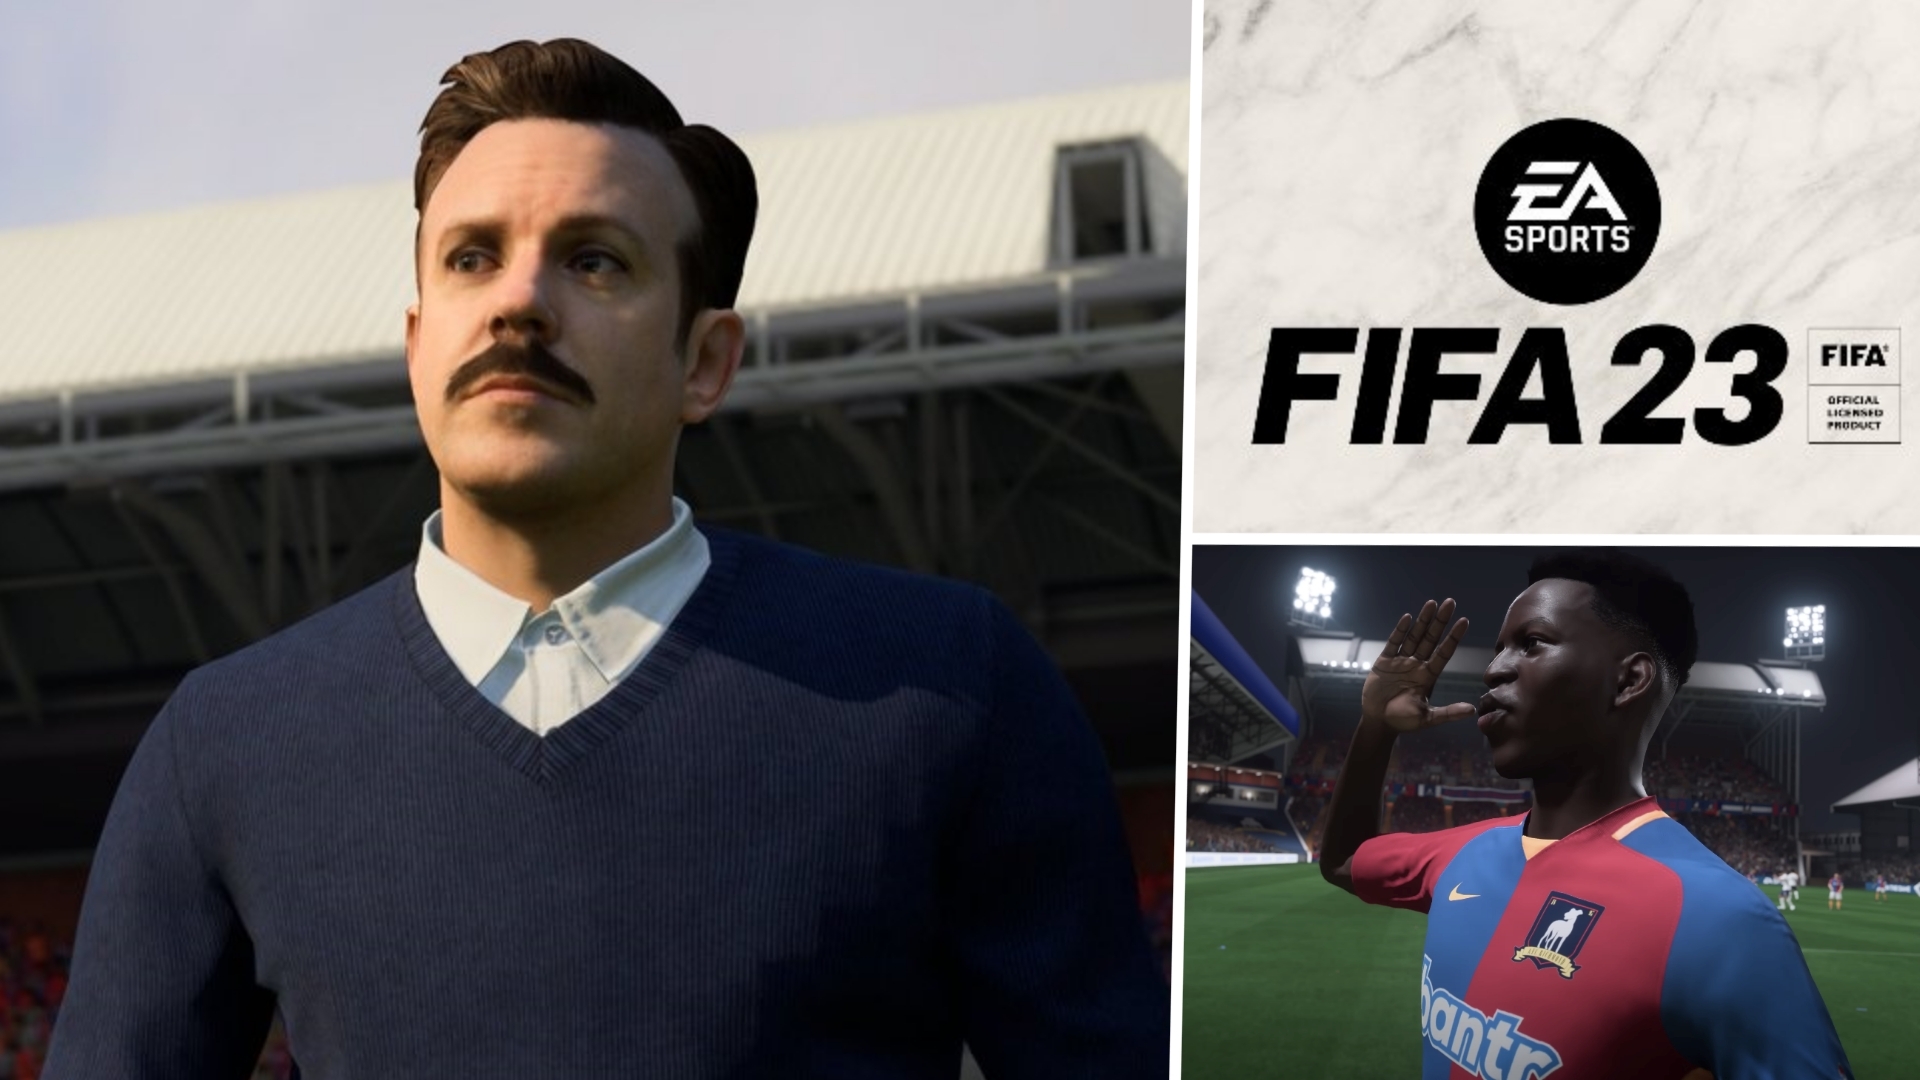 EA SPORTS FC 24 Real Madrid  Bring in 3 Players That Coach Ted Lasso  Wants, Let's Get up! #64 